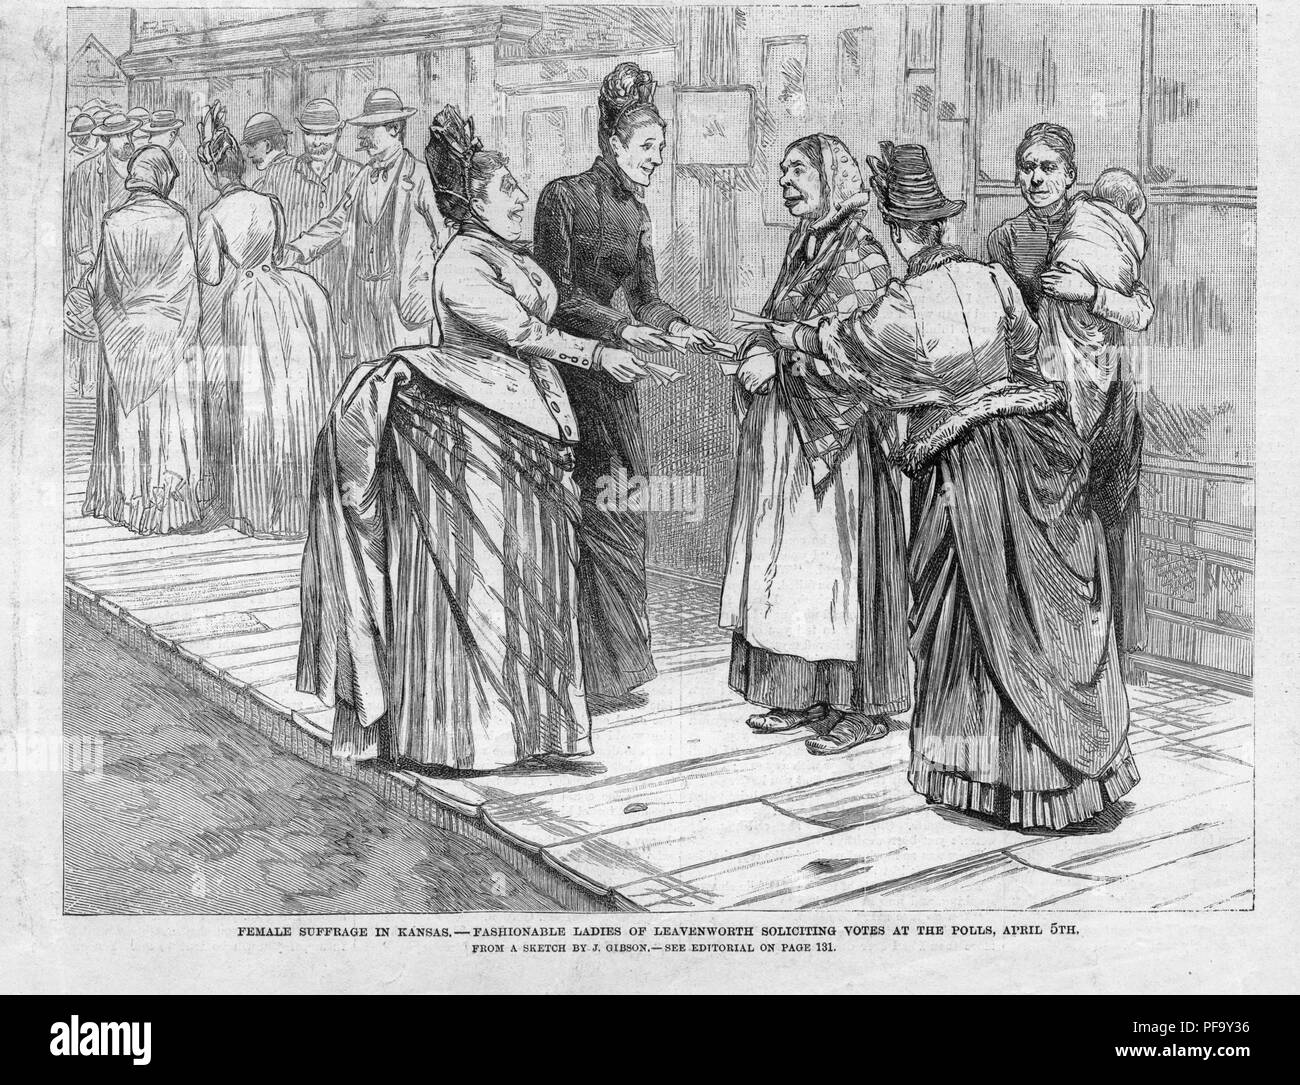 Black and white print illustrating women soliciting votes in Kansas, although they could not vote in national elections until 1912, captioned 'Female suffrage in Kansas, fashionable ladies of Leavenworth soliciting votes at the polls, April 5th, ' illustrated by J Gibson, and published for the American market, 1887. () Stock Photo